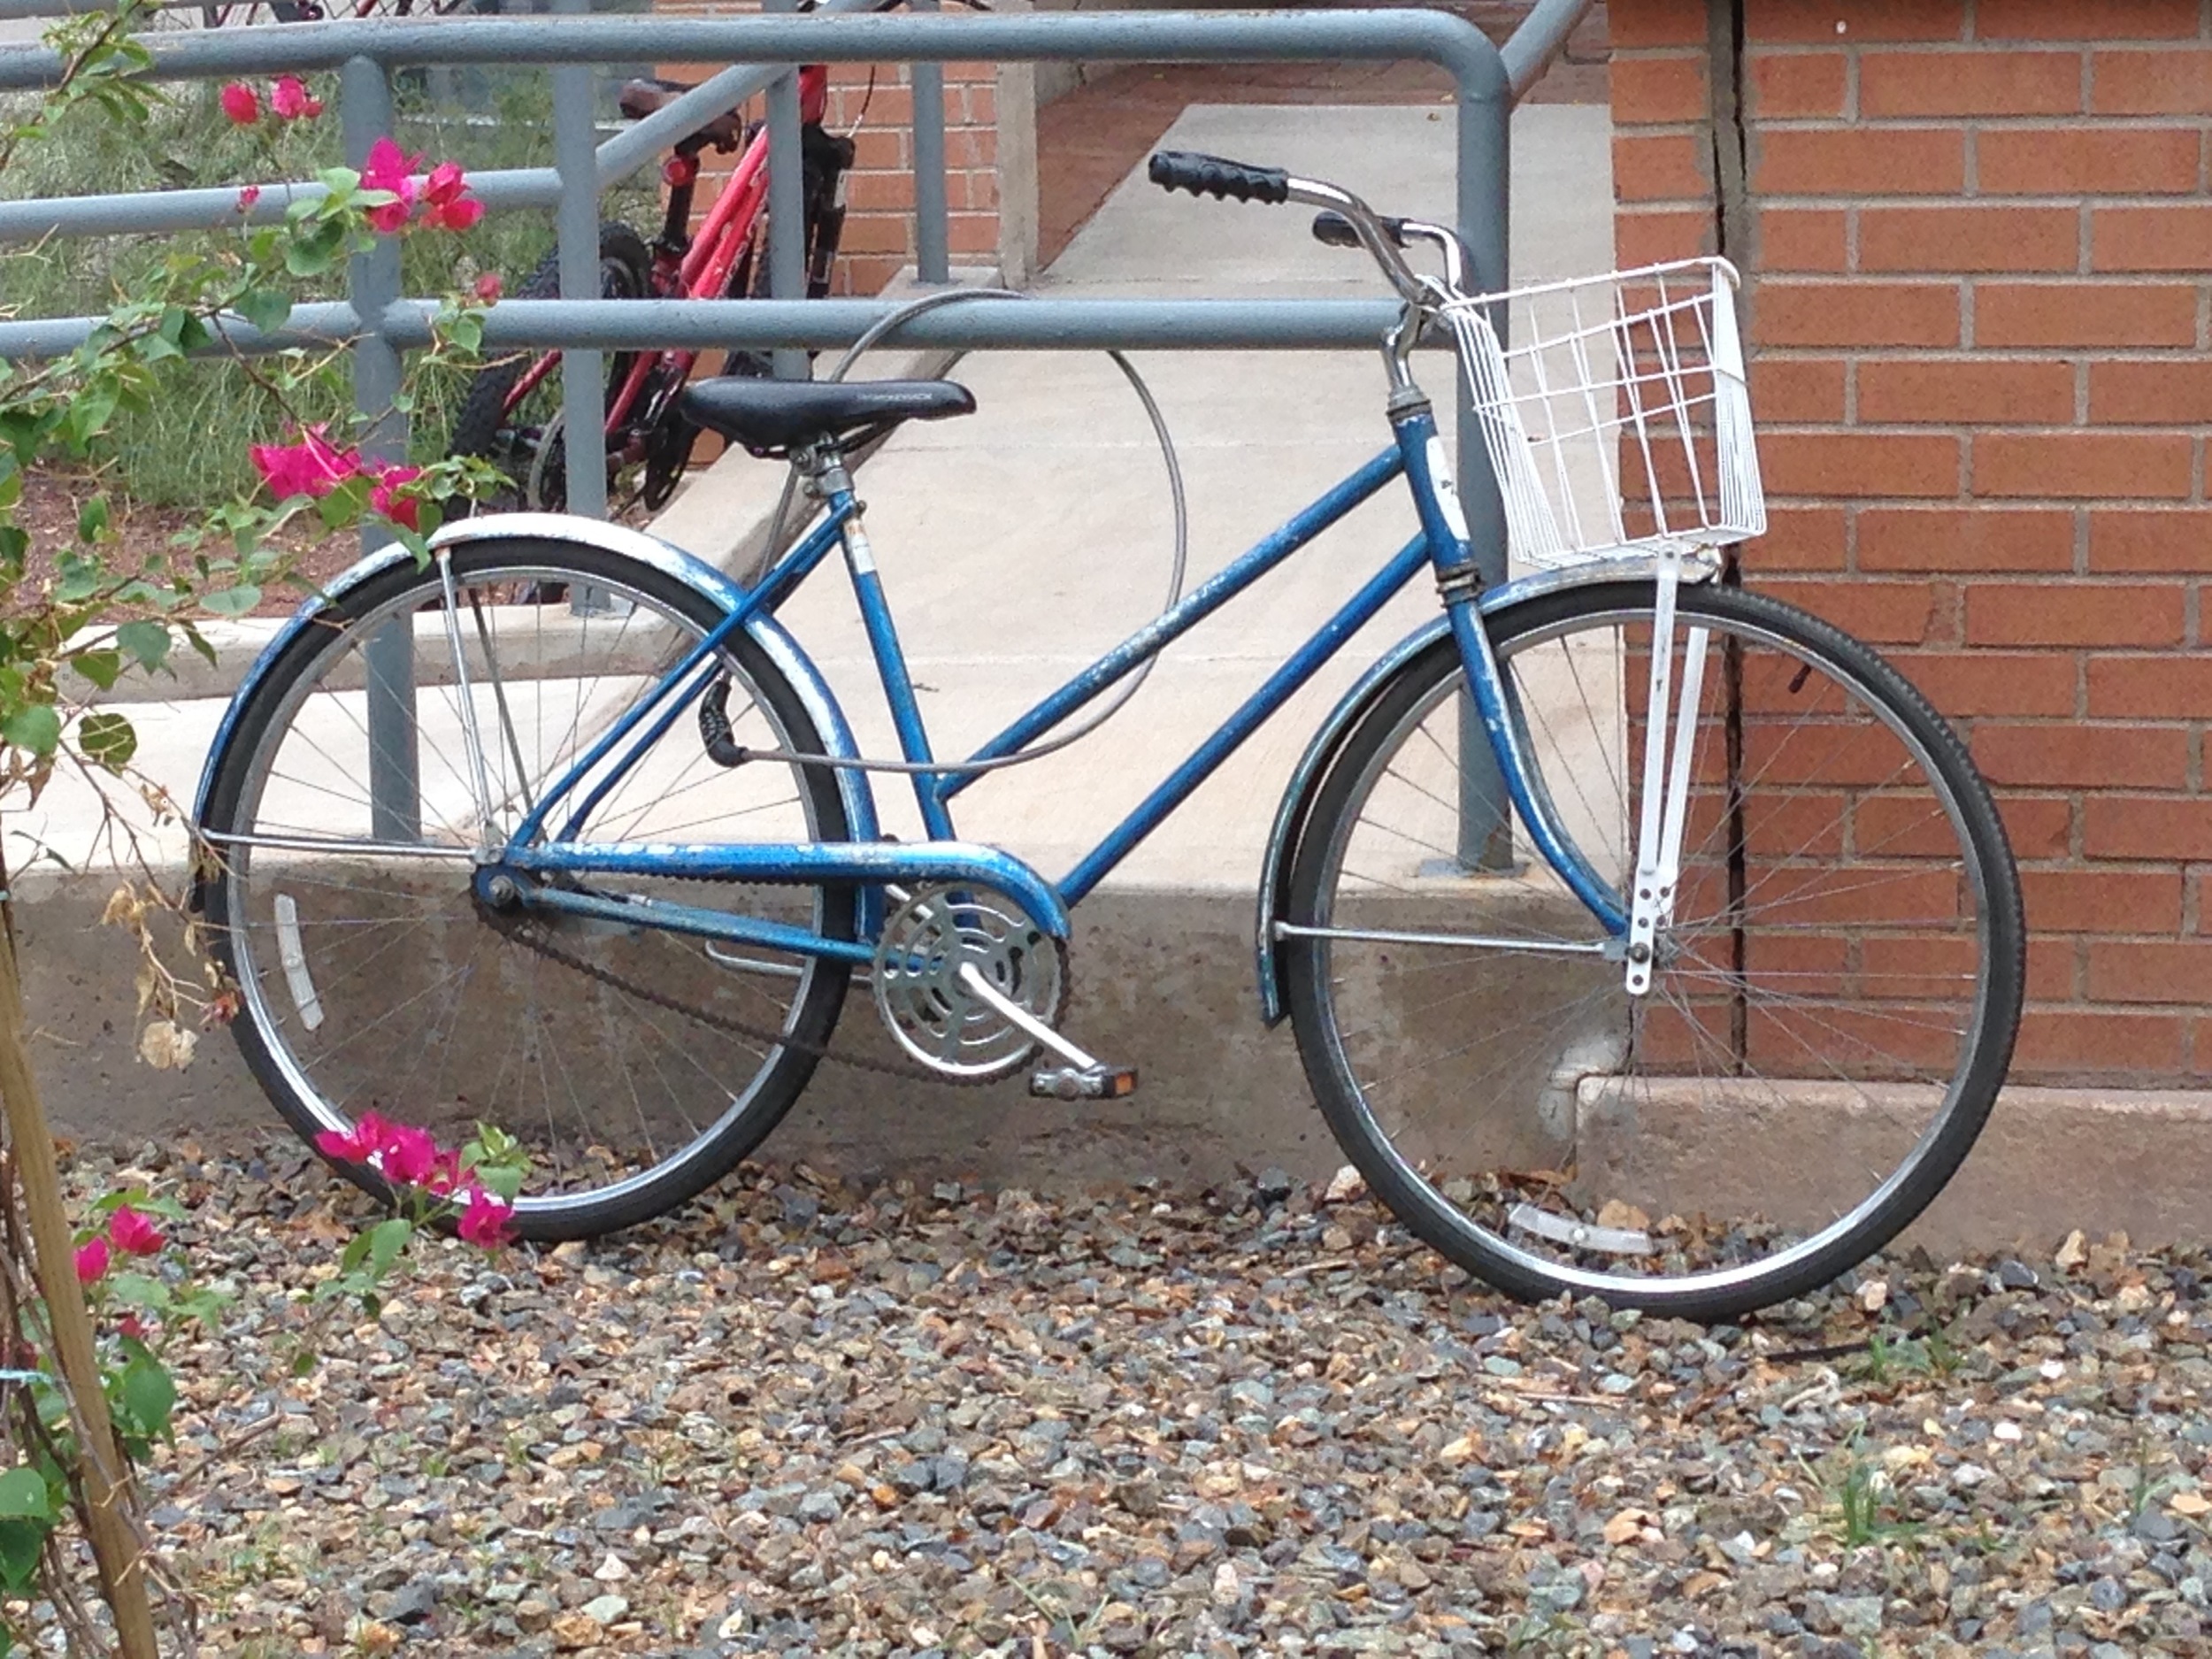  I saw this bike on my way to class one day. I might have to draw a bike sometime. Aren't they fun? 